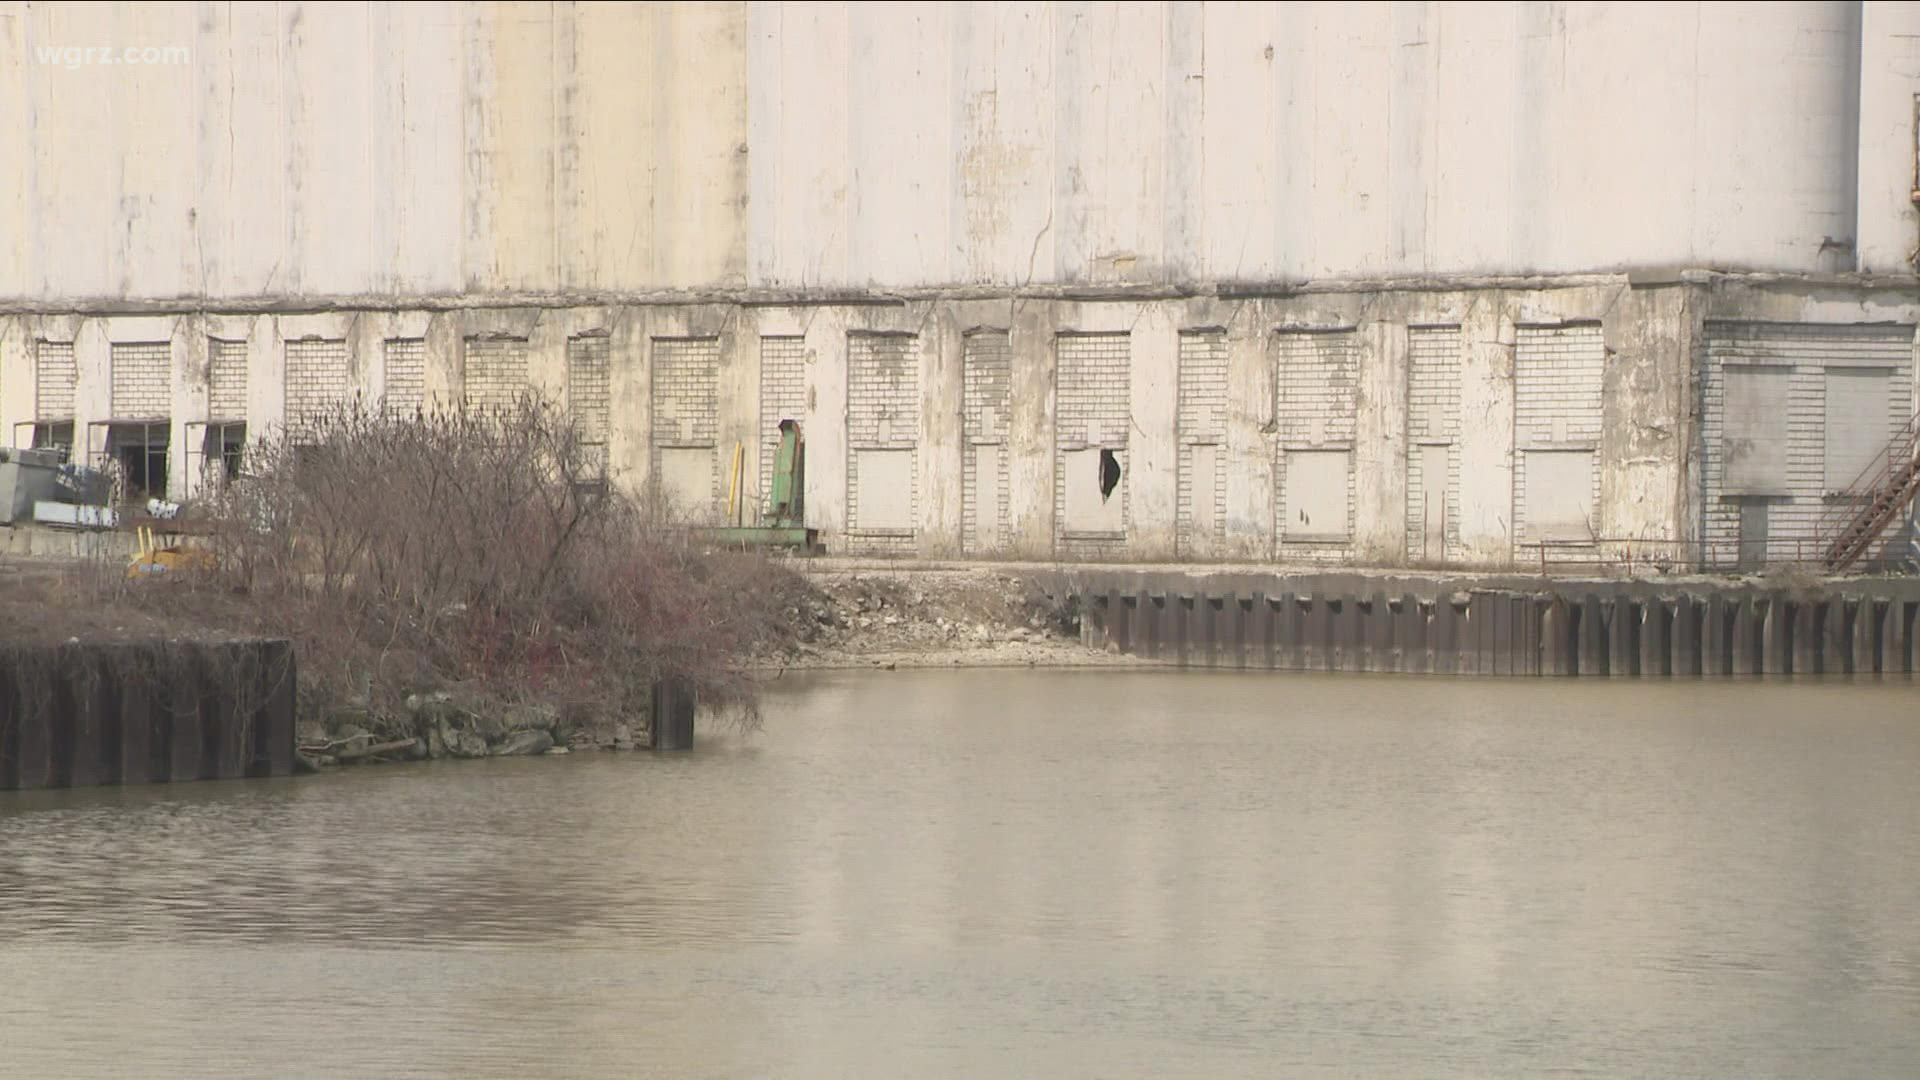 There are new efforts to advance the Buffalo Riverwalk project. Leaders are now coming together to launch a "feasibility study."